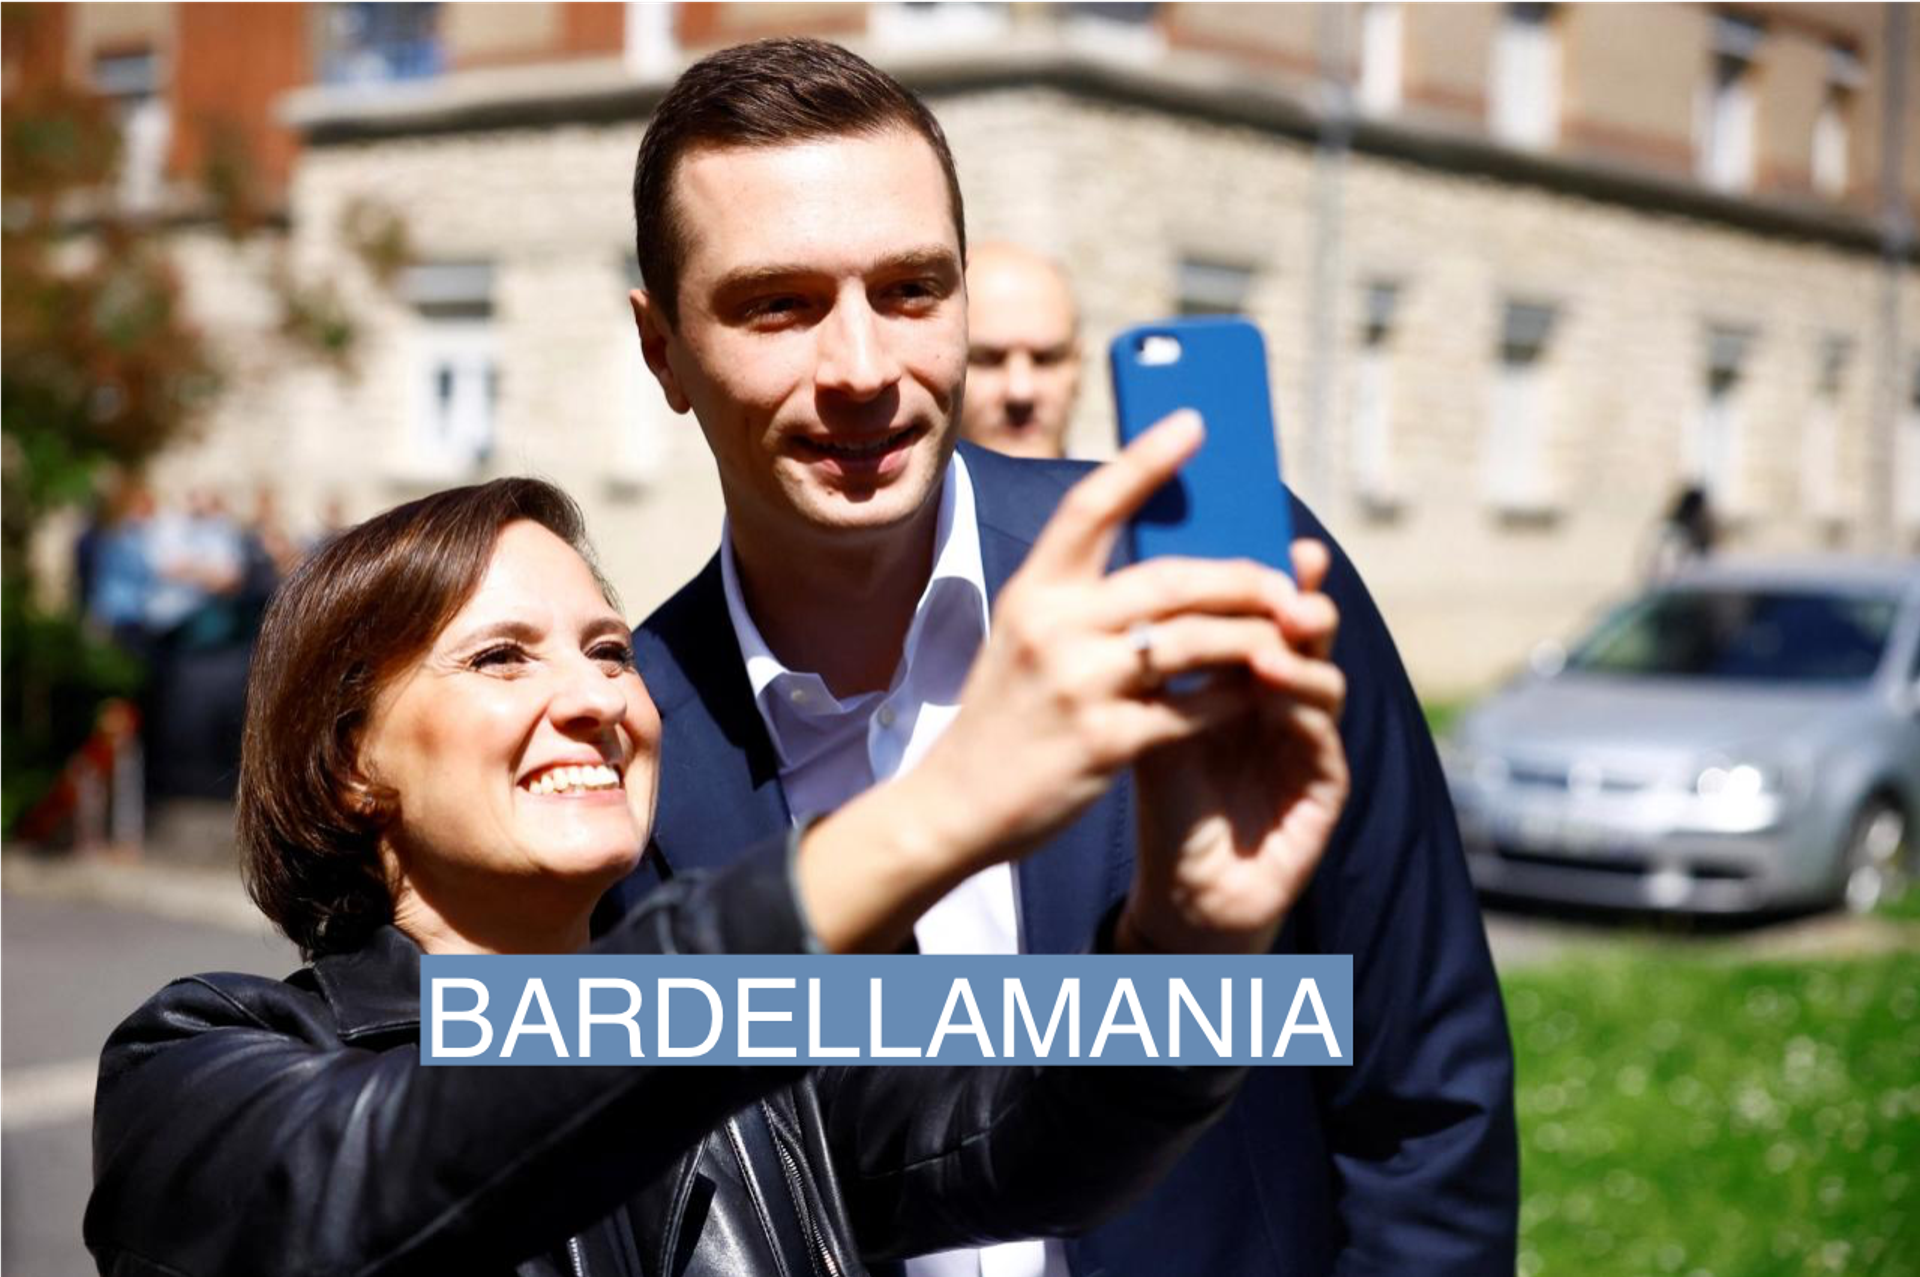 Jordan Bardella taking a selfie with a supporter.